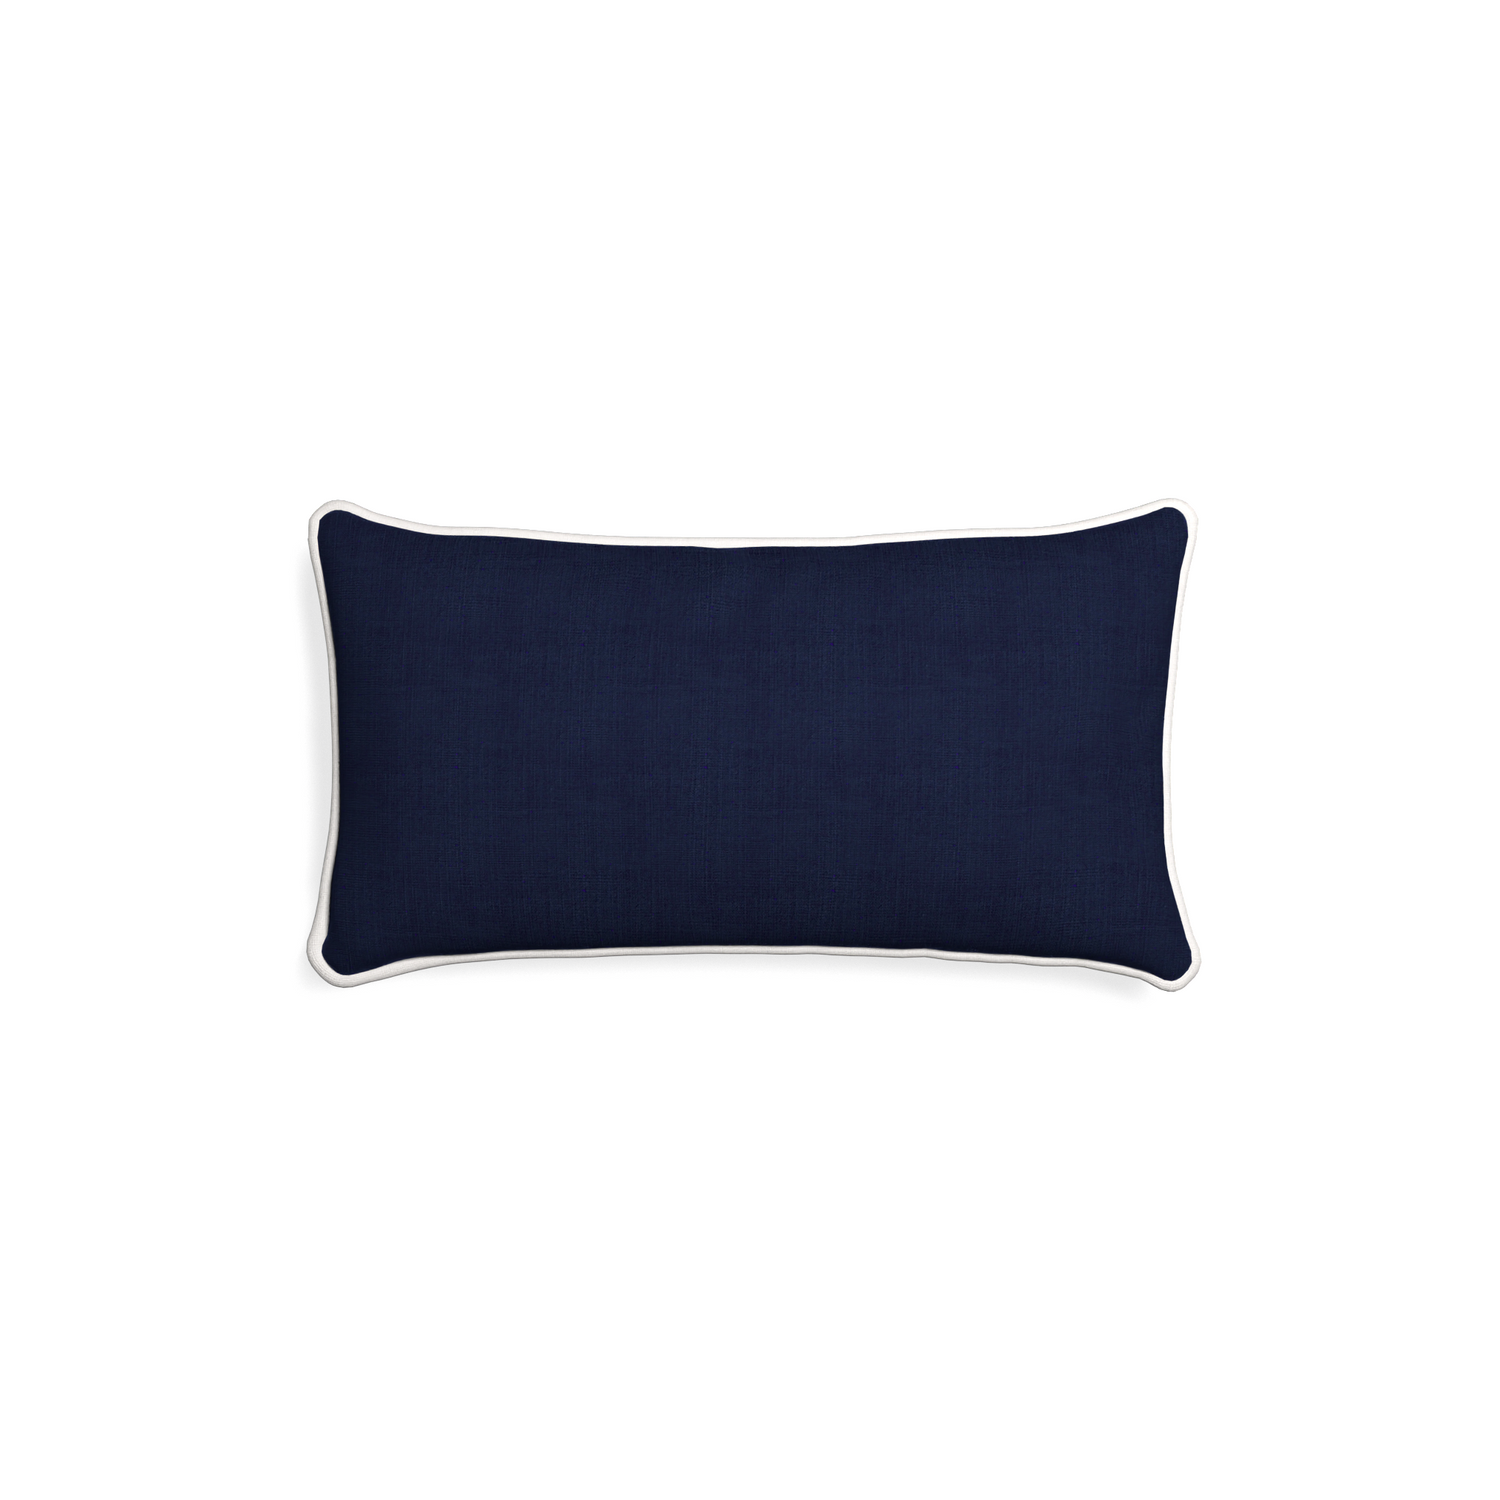 Petite-lumbar midnight custom navy bluepillow with snow piping on white background